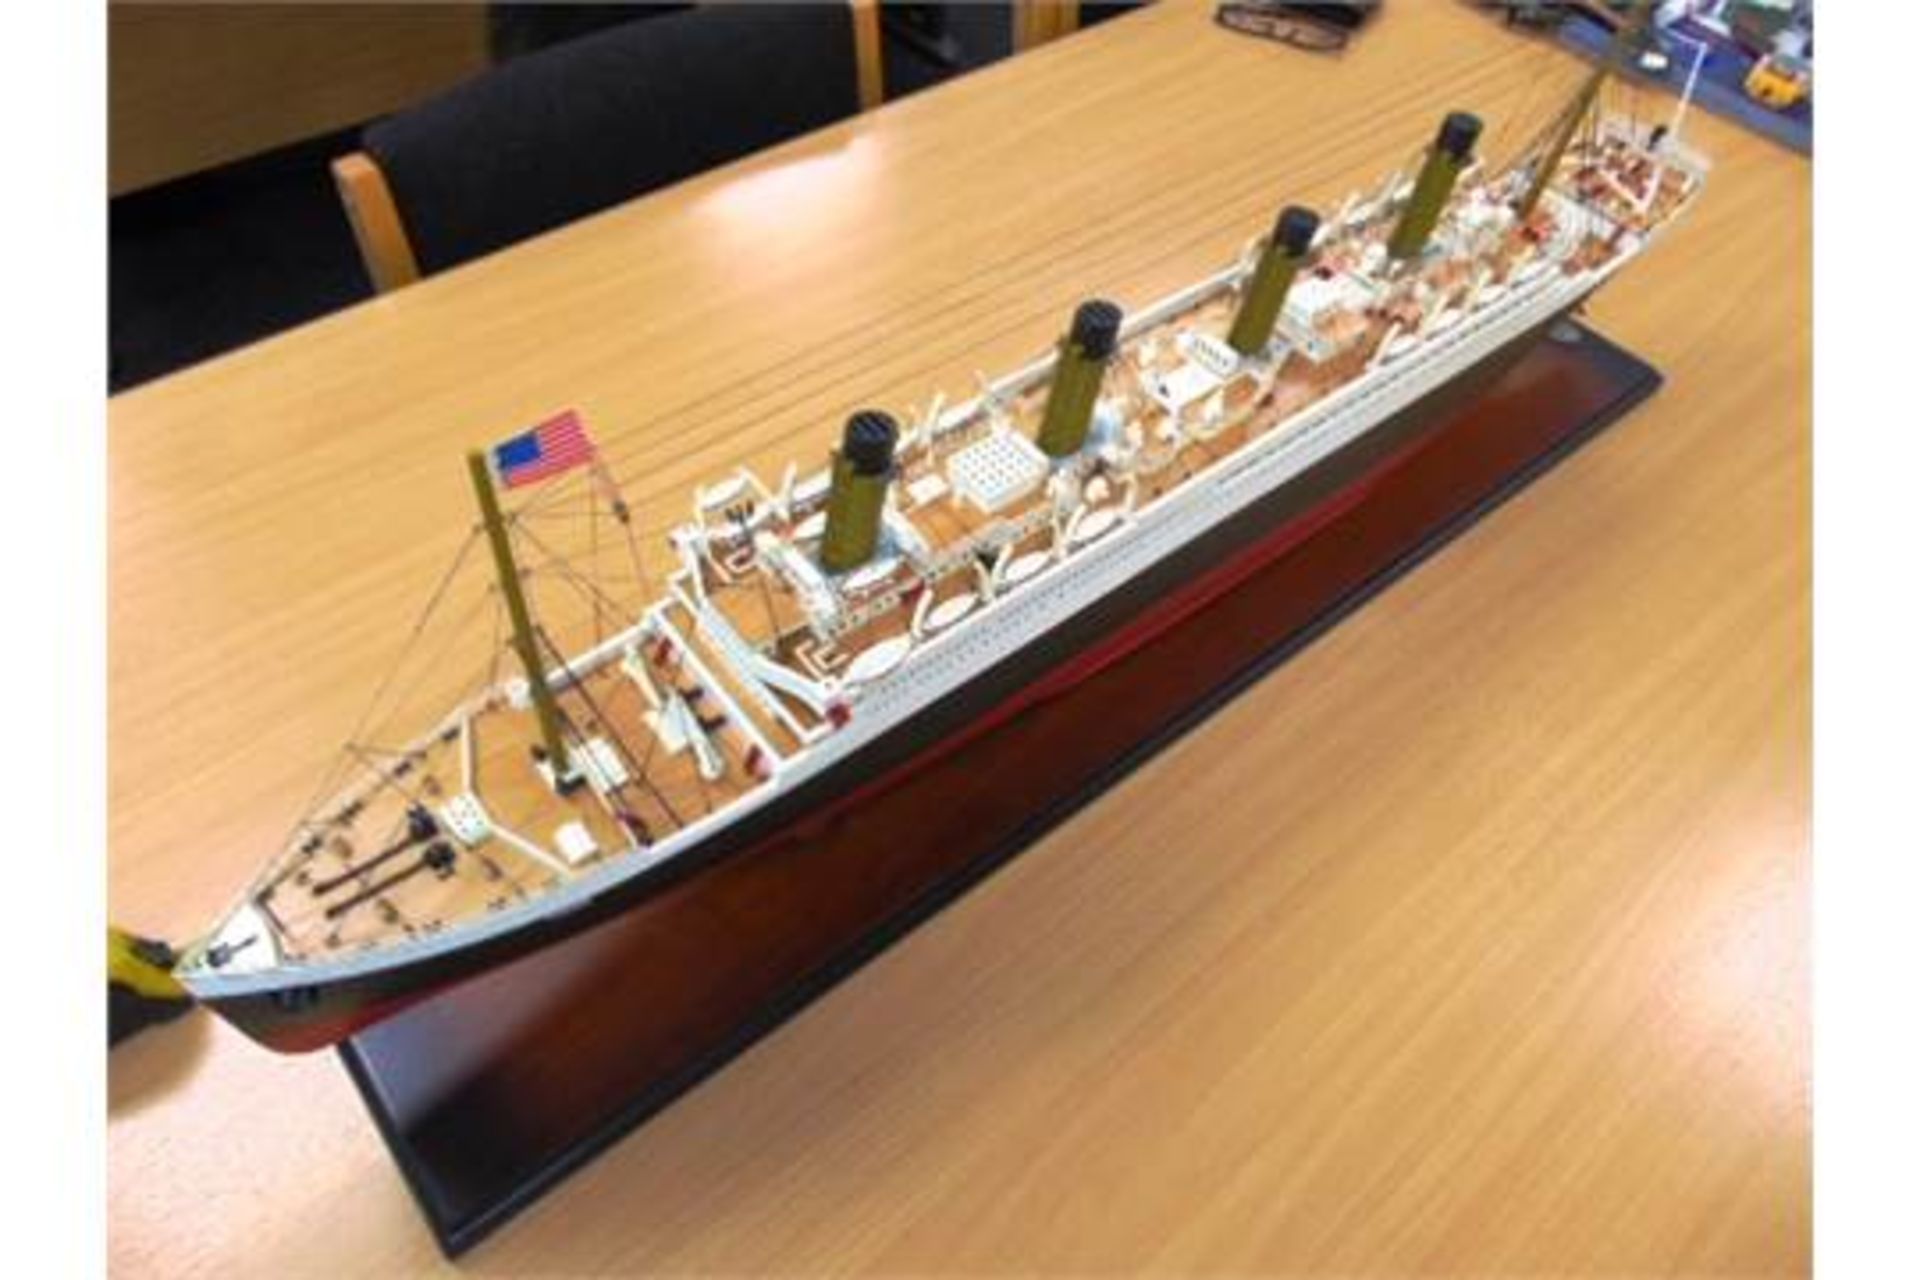 HIGHLY DETAILED MODEL OF RMS TITANIC - Image 5 of 11